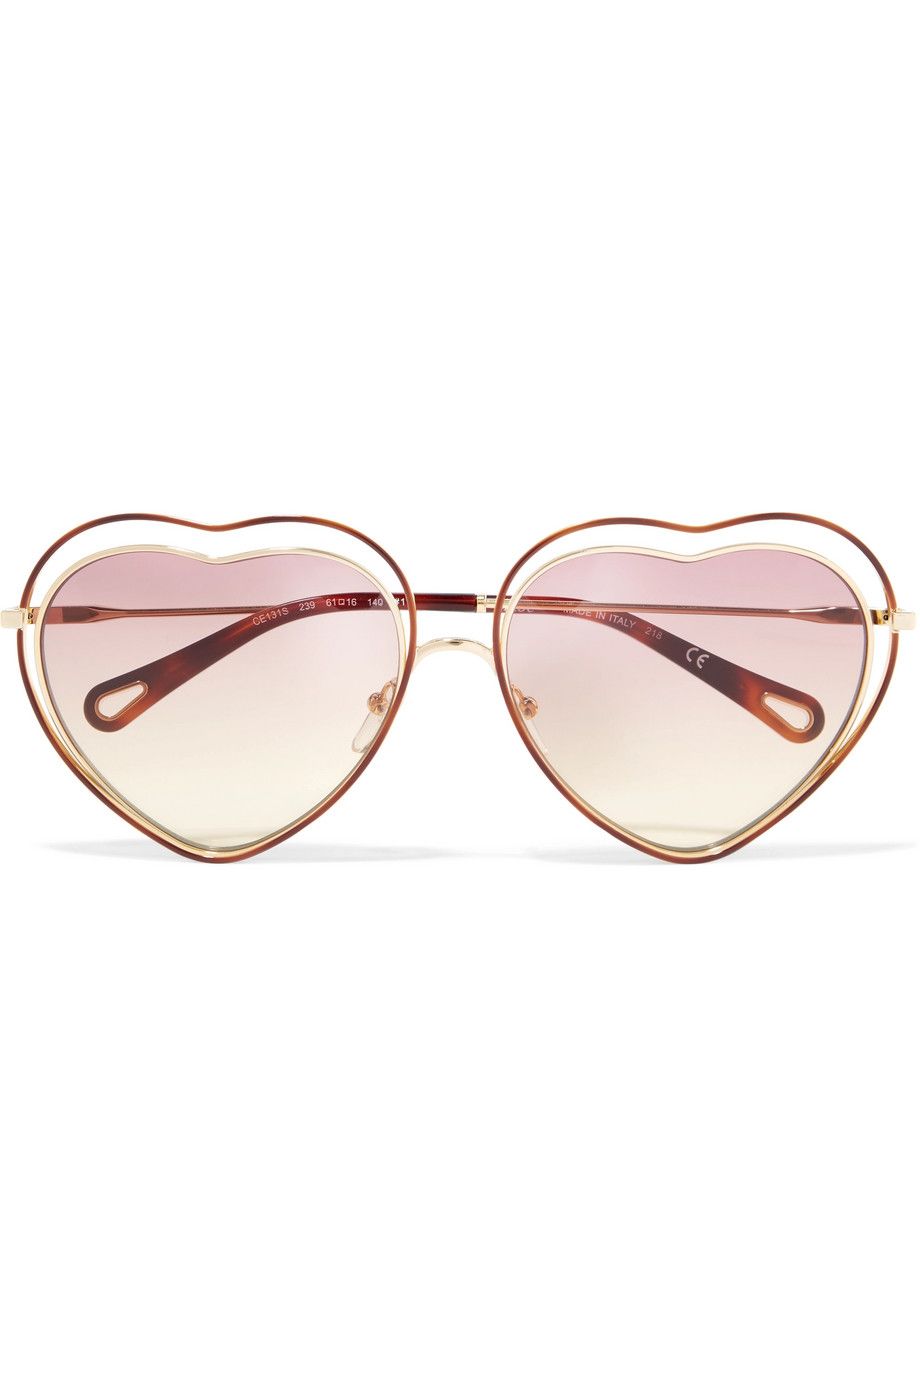 Poppy Love heart-shaped acetate and gold-tone sunglasses